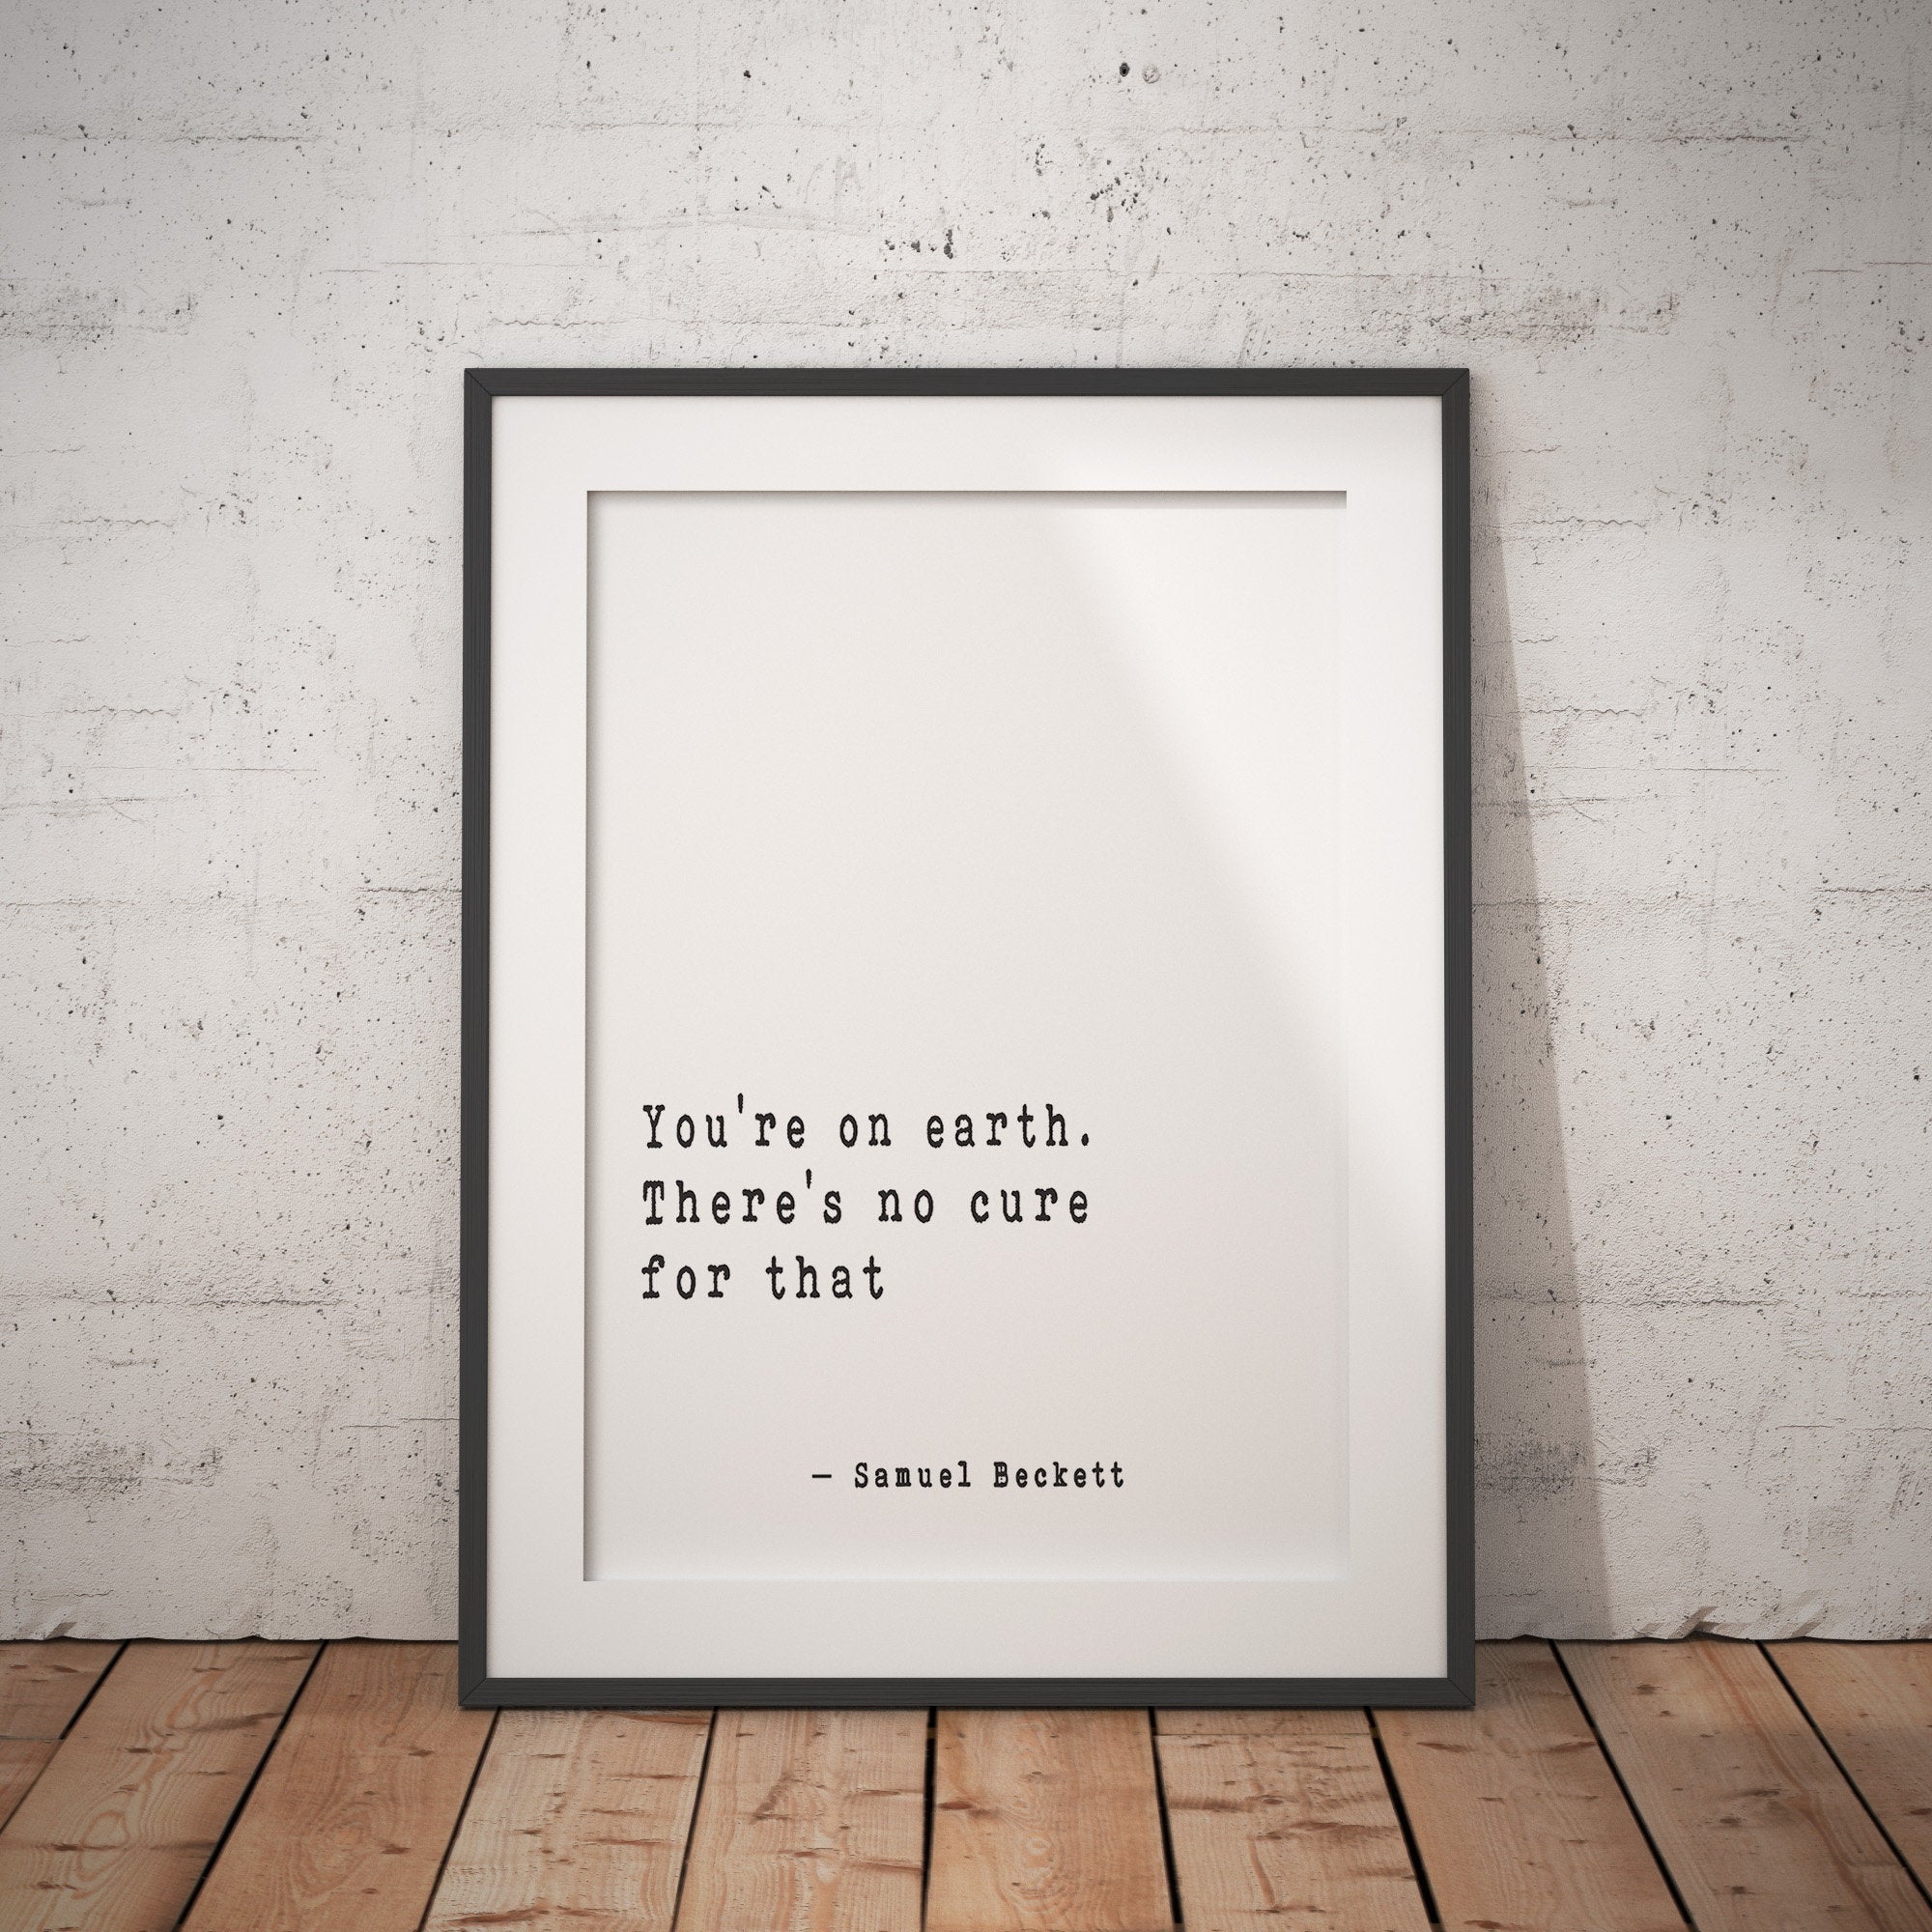 Samuel Beckett Quote Print, You're on Earth. There's no cure for that, Humour Quote, Motivational Artwork, Inspirational Print, Unframed - BookQuoteDecor